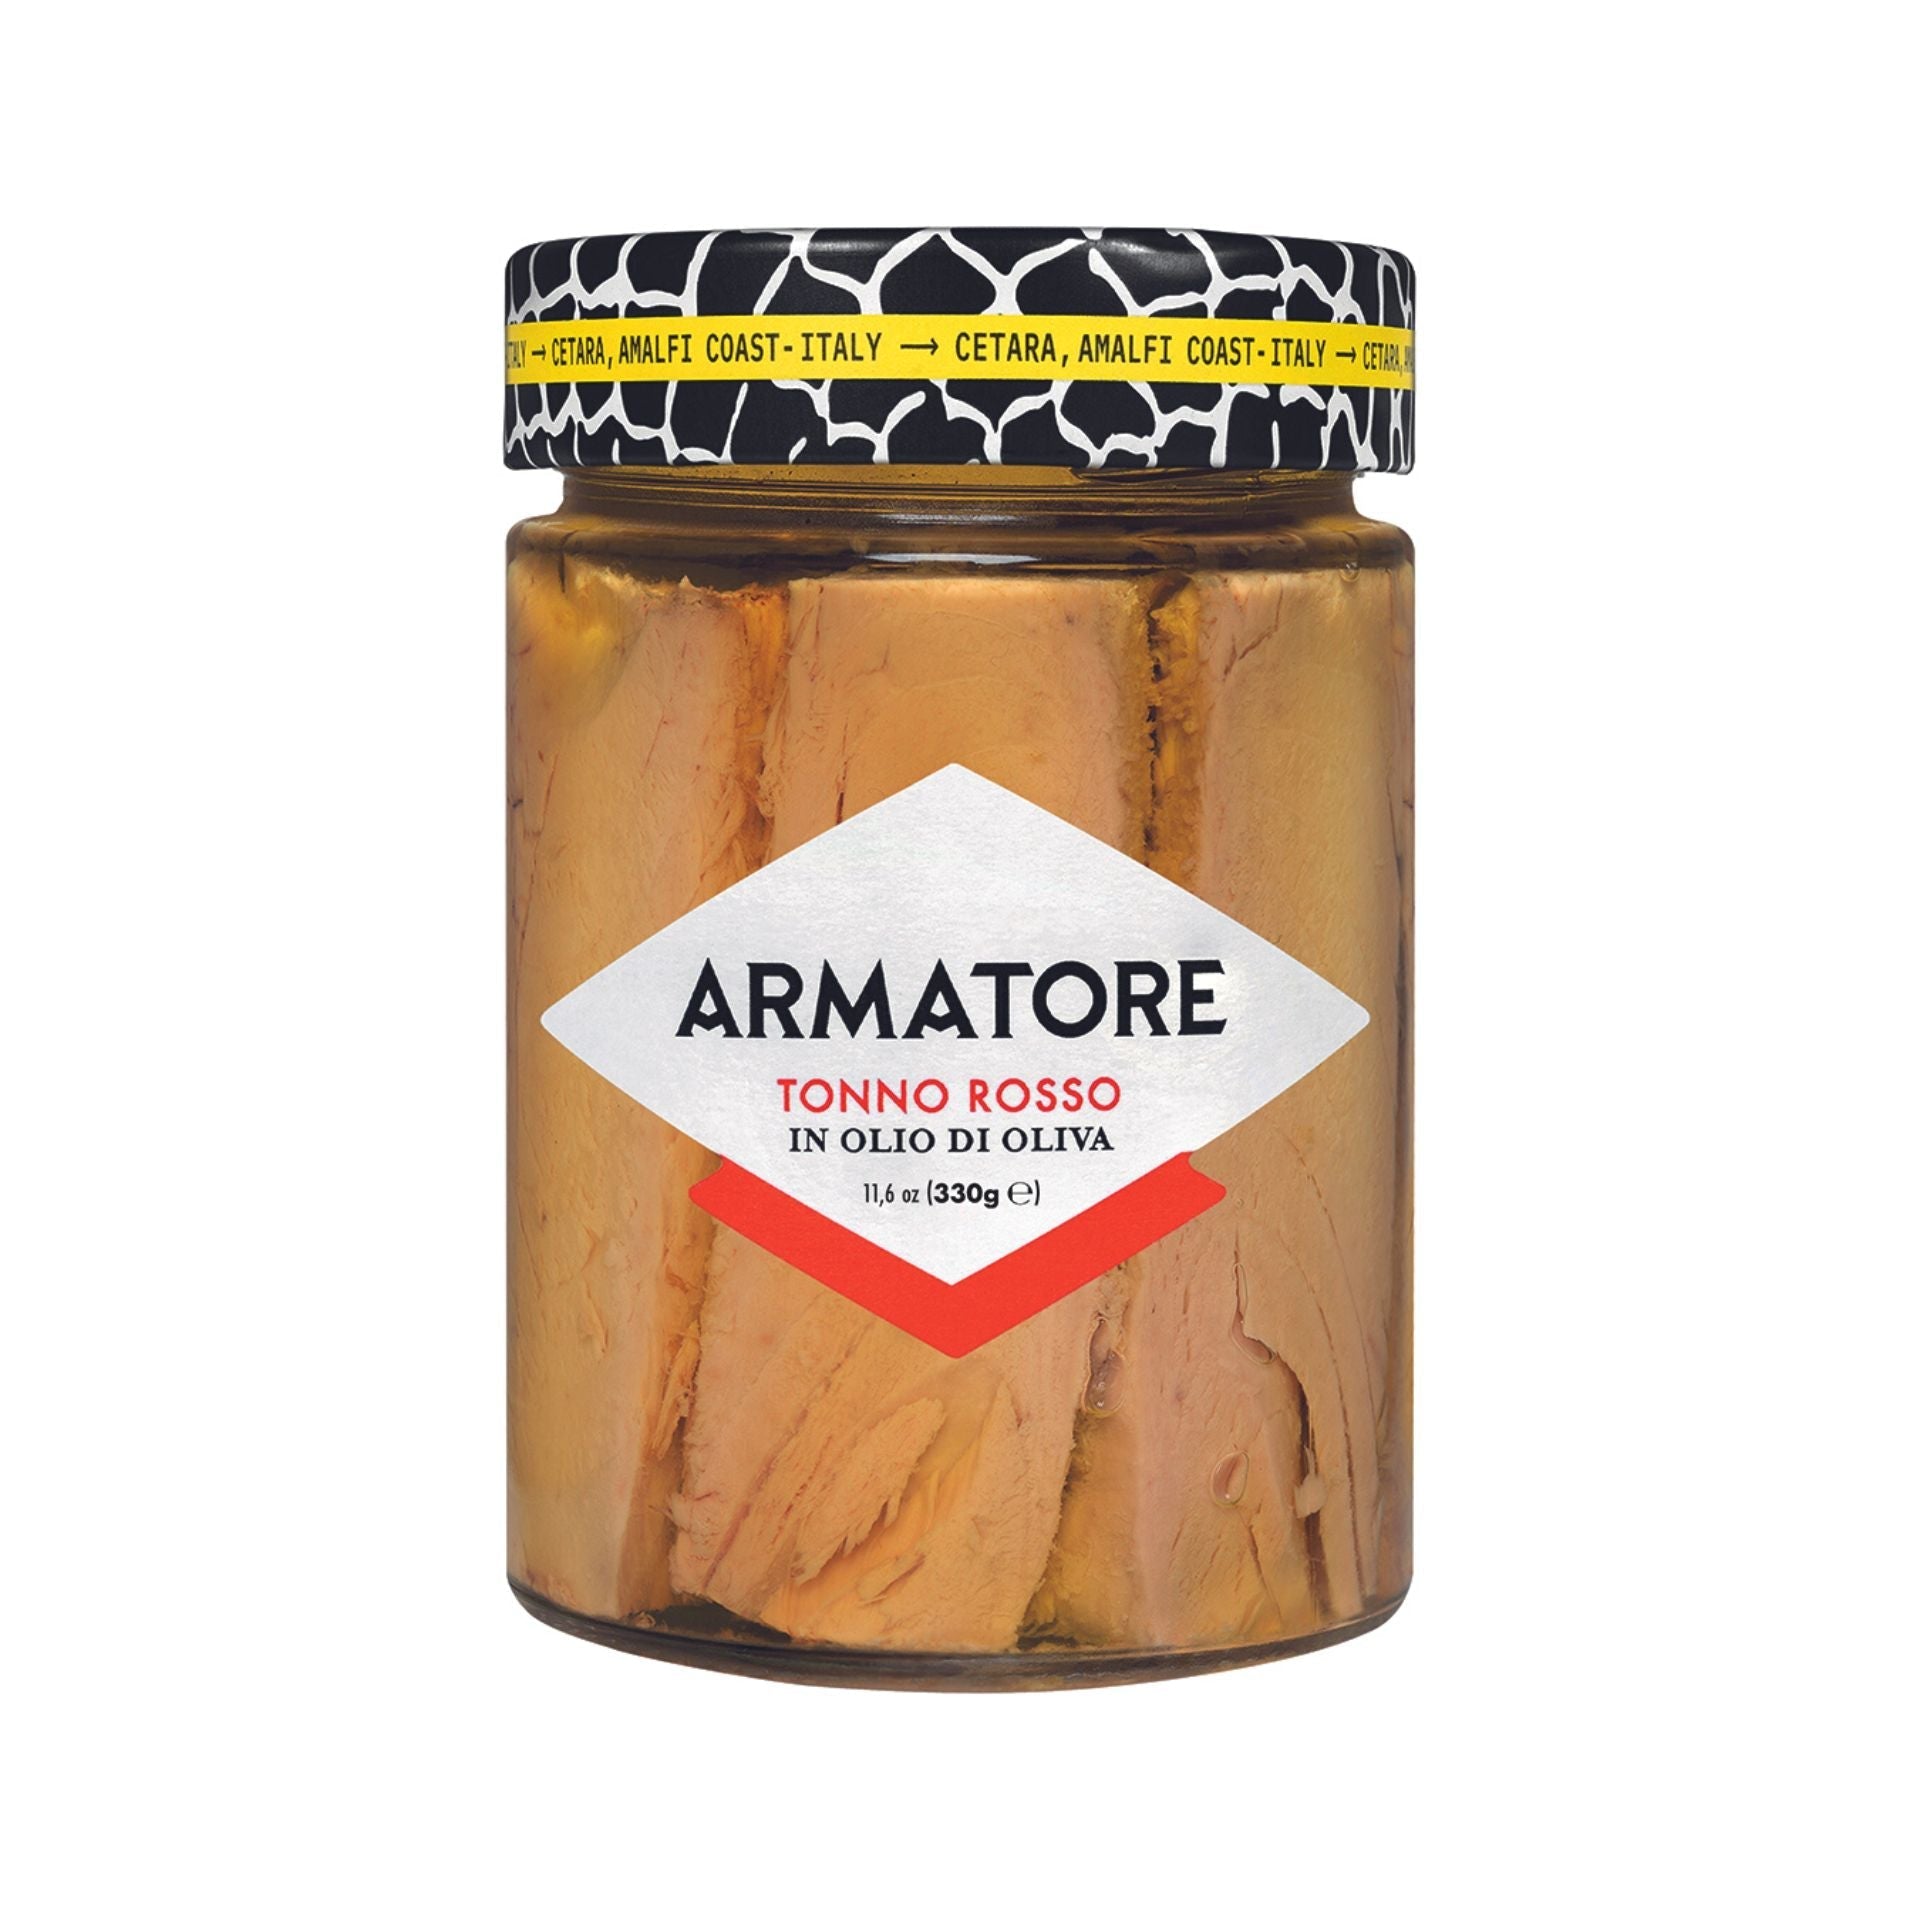 Armatore Bluefin Tuna Fillets in Olive Oil 330g  | Imported and distributed in the UK by Just Gourmet Foods